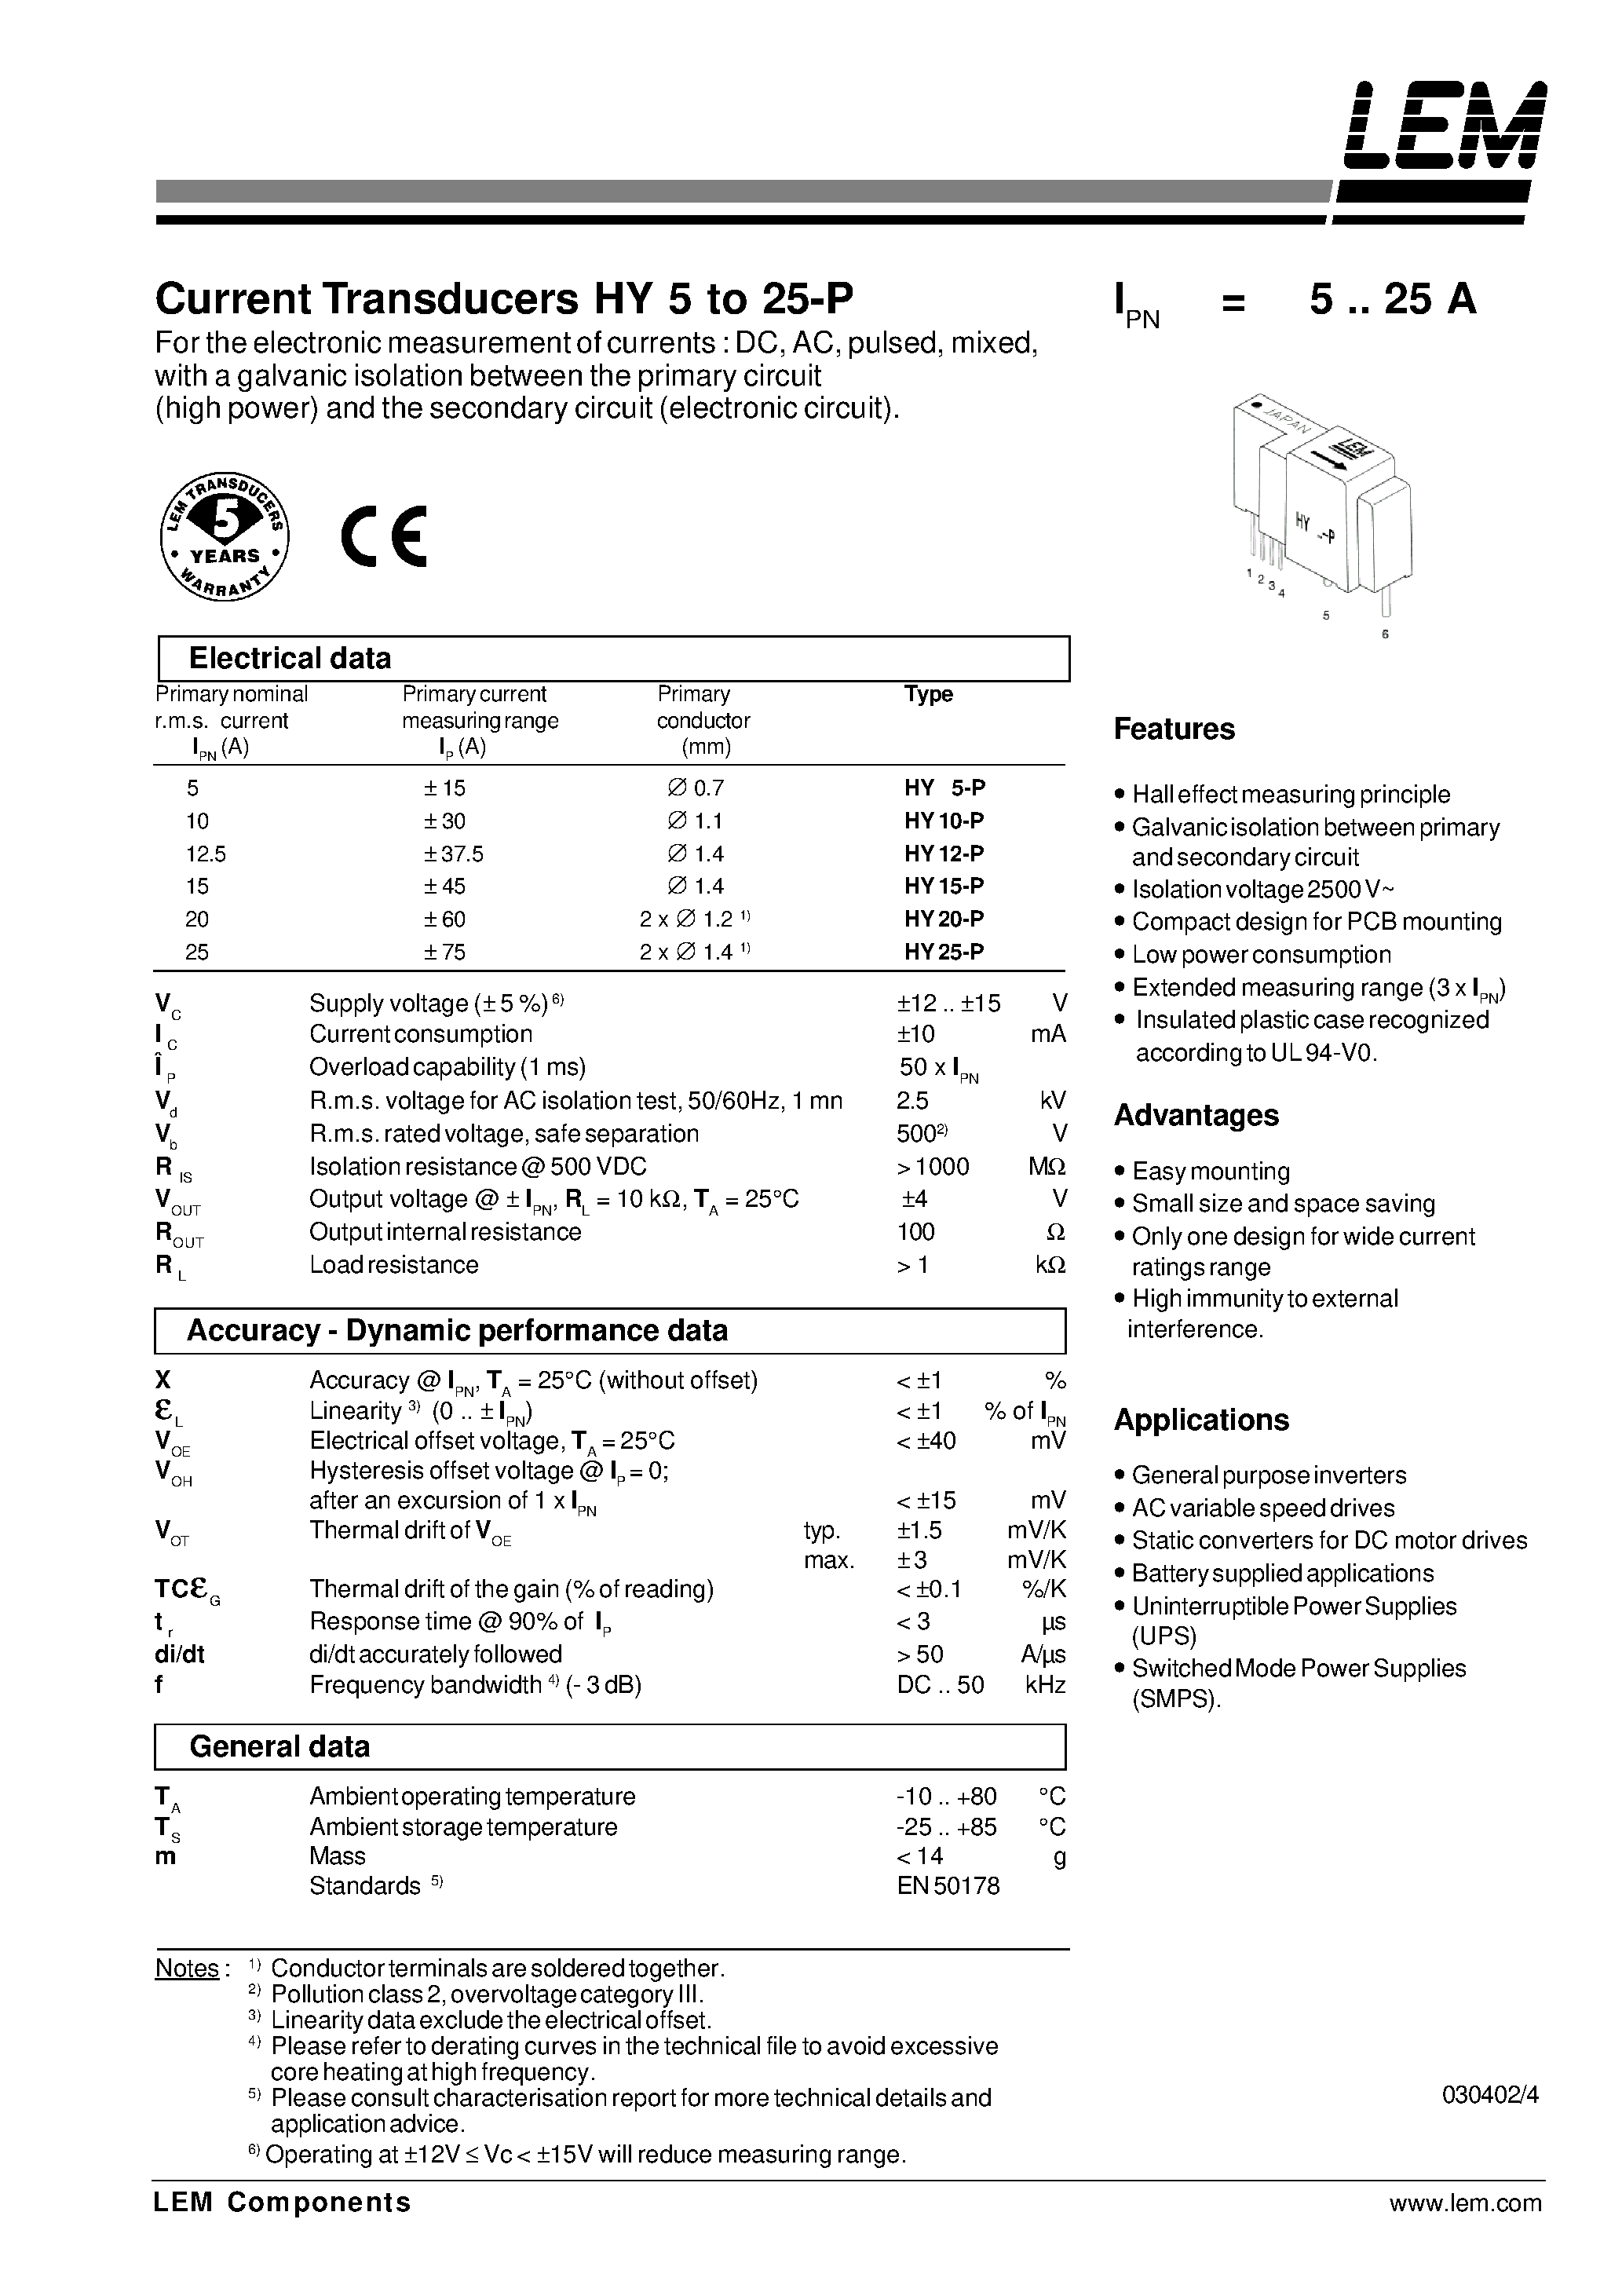 Datasheet HY12-P - Current Transducers HY 5 to 25-P page 1